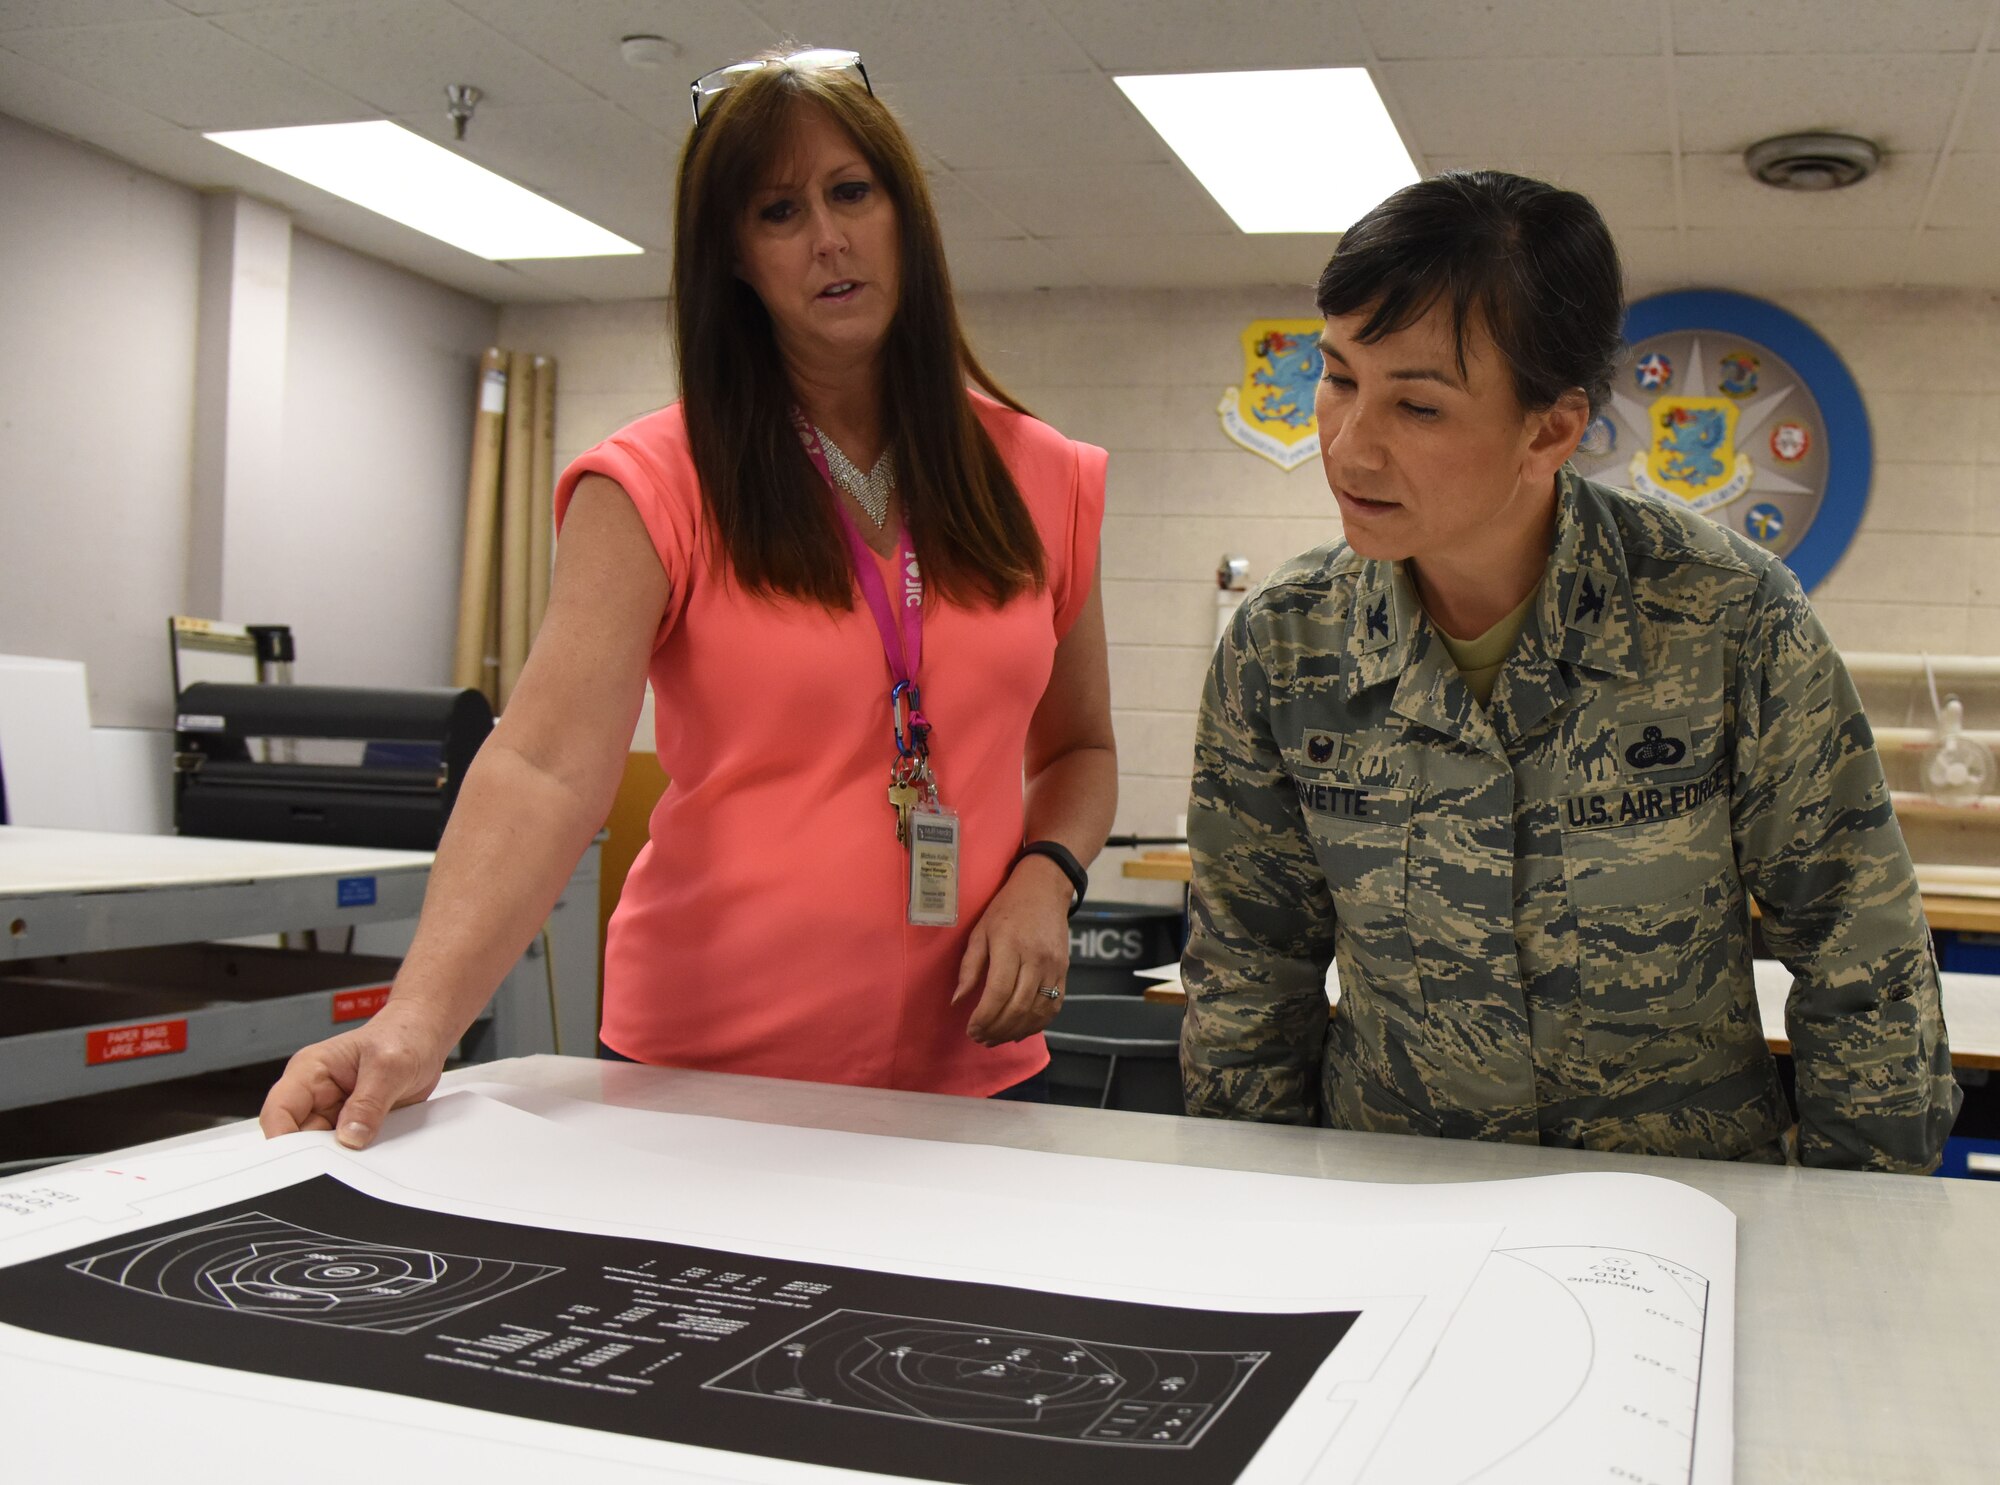 Michele Keller, 81st Training Wing public affairs graphic illustrator, shows Col. Debra Lovette, 81st TRW commander, an example of a graphic illustration at Wall Studio during a Wing Staff Agency orientation tour June 27, 2017, on Keesler Air Force Base, Miss. The tour familiarized Lovette with the Wing Staff Agency mission, operations and personnel. (U.S. Air Force photo by Kemberly Groue)